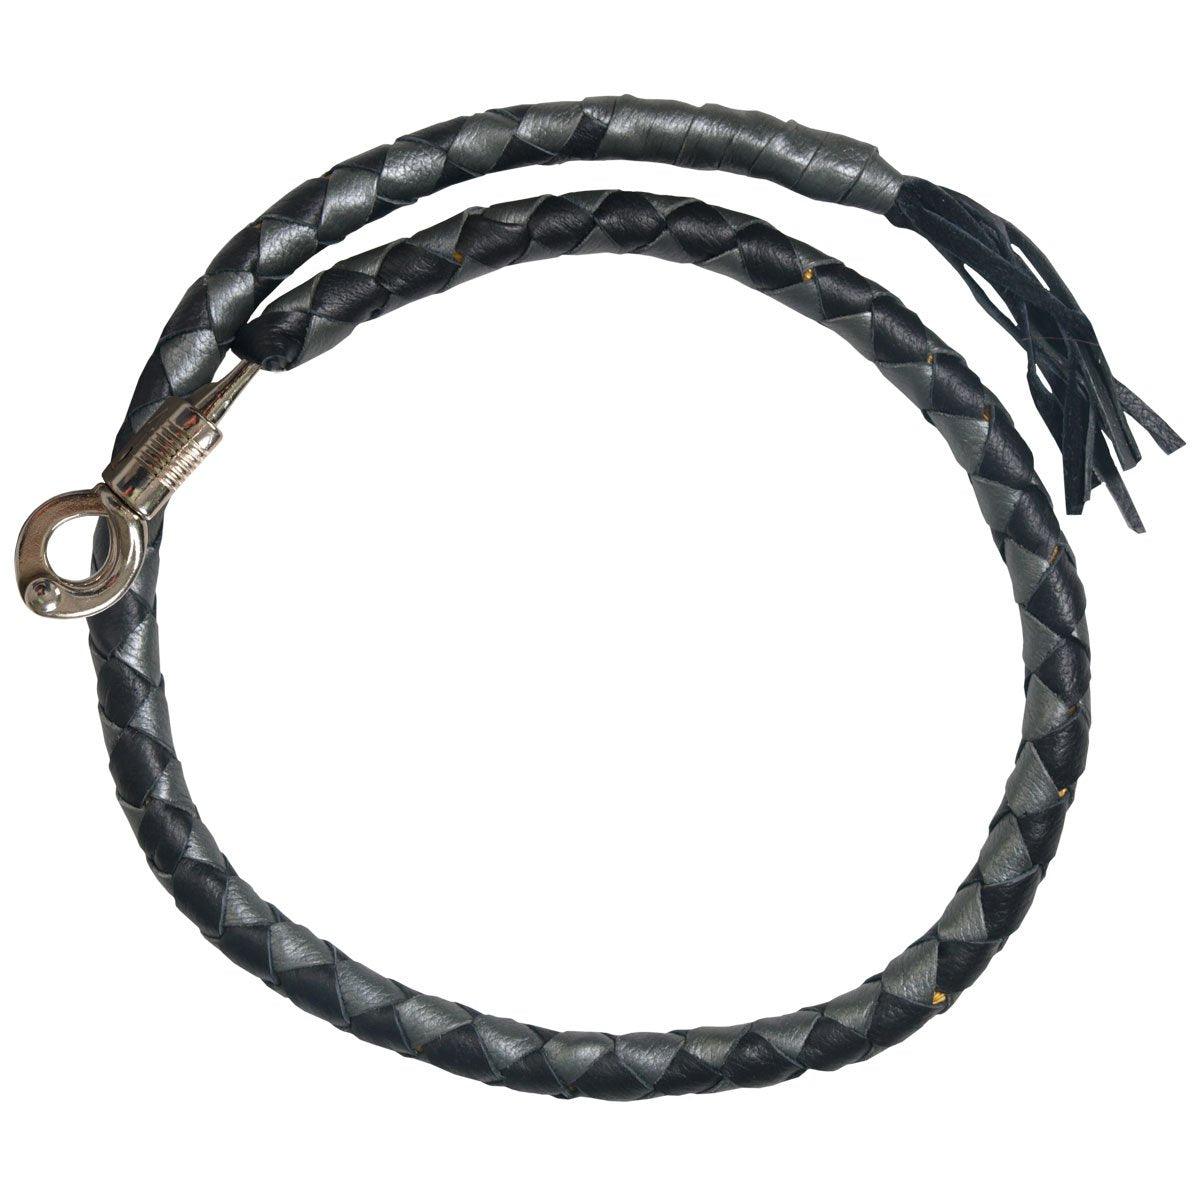 Hot Leathers "Get Back" Black And Silver Genuine Leather Whip - American Legend Rider